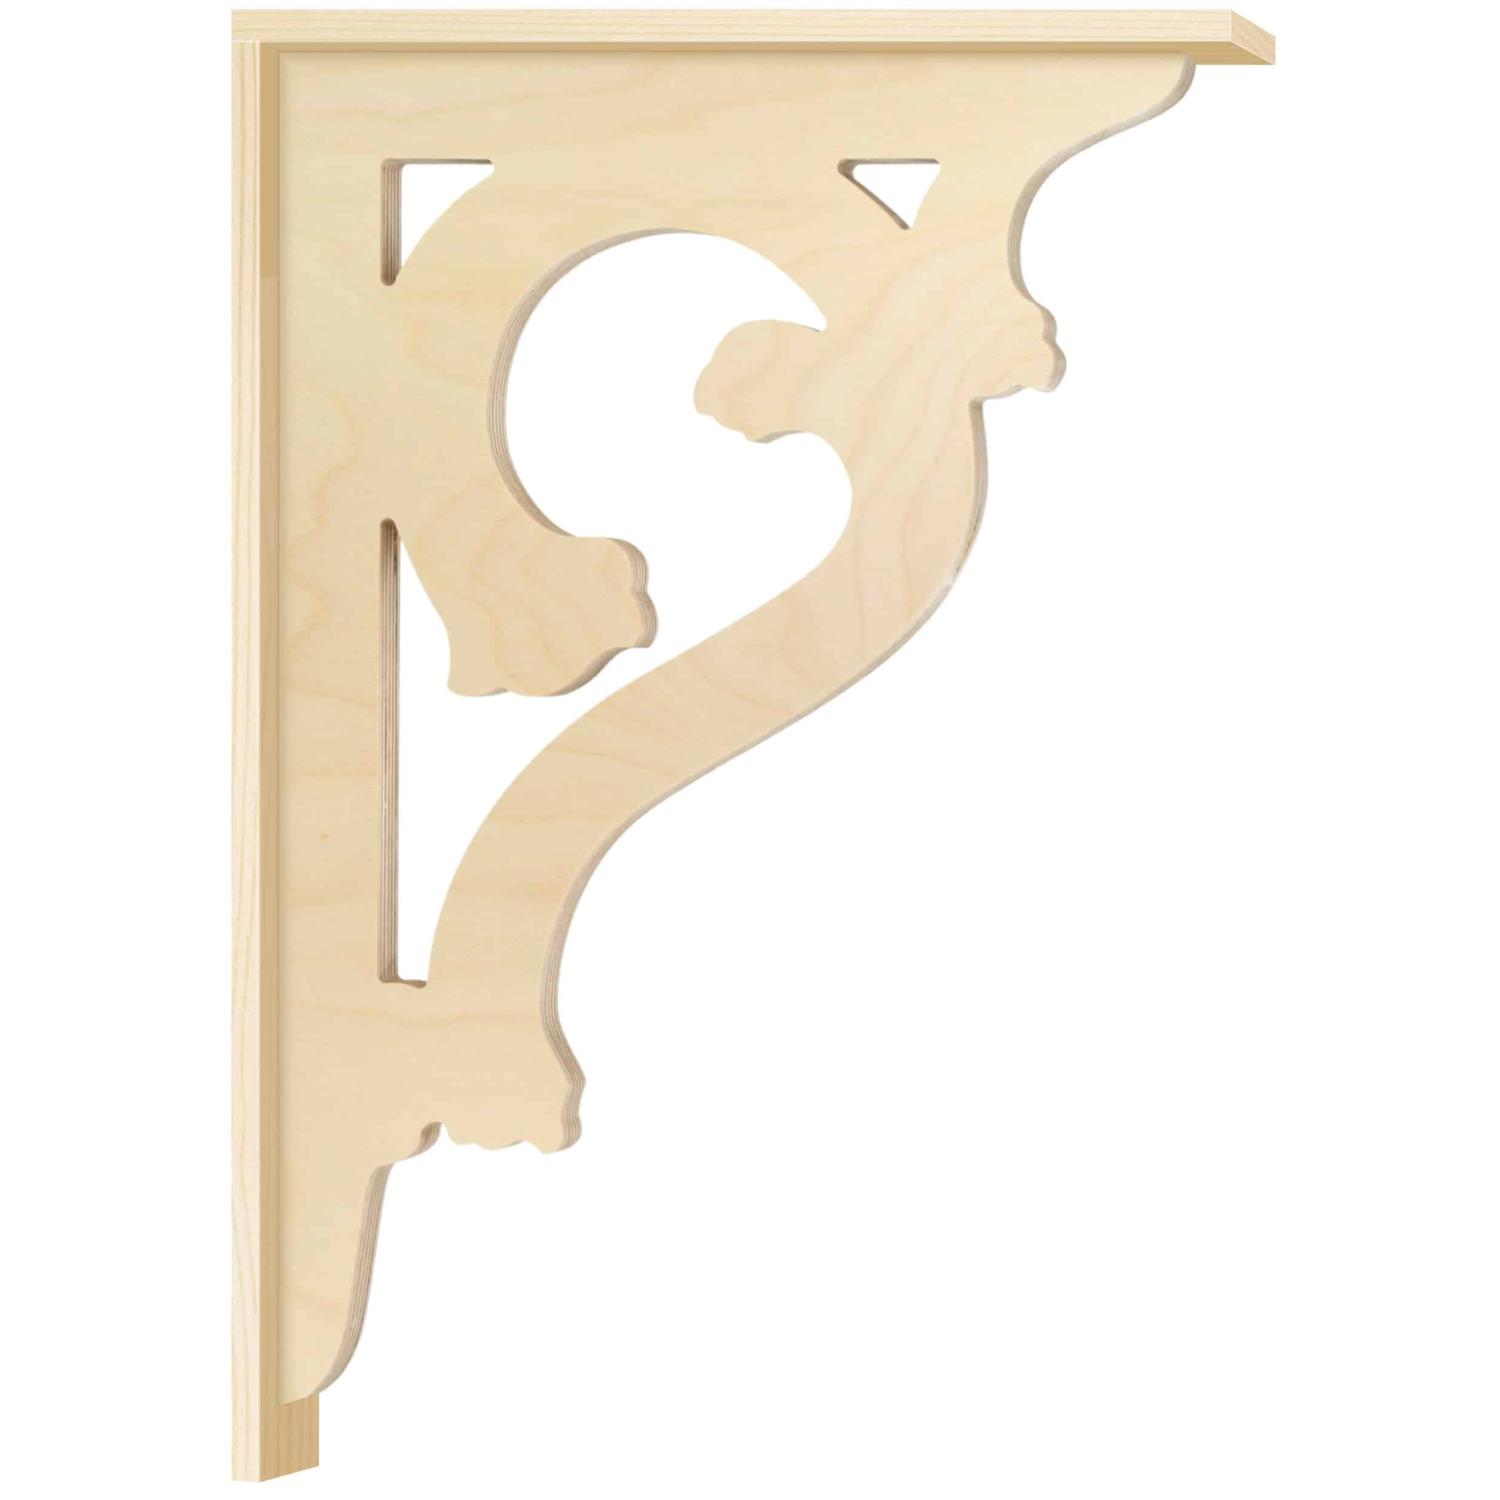 Bracket 007A – Victorian corbel for porch and veranda with decorative wooden strip